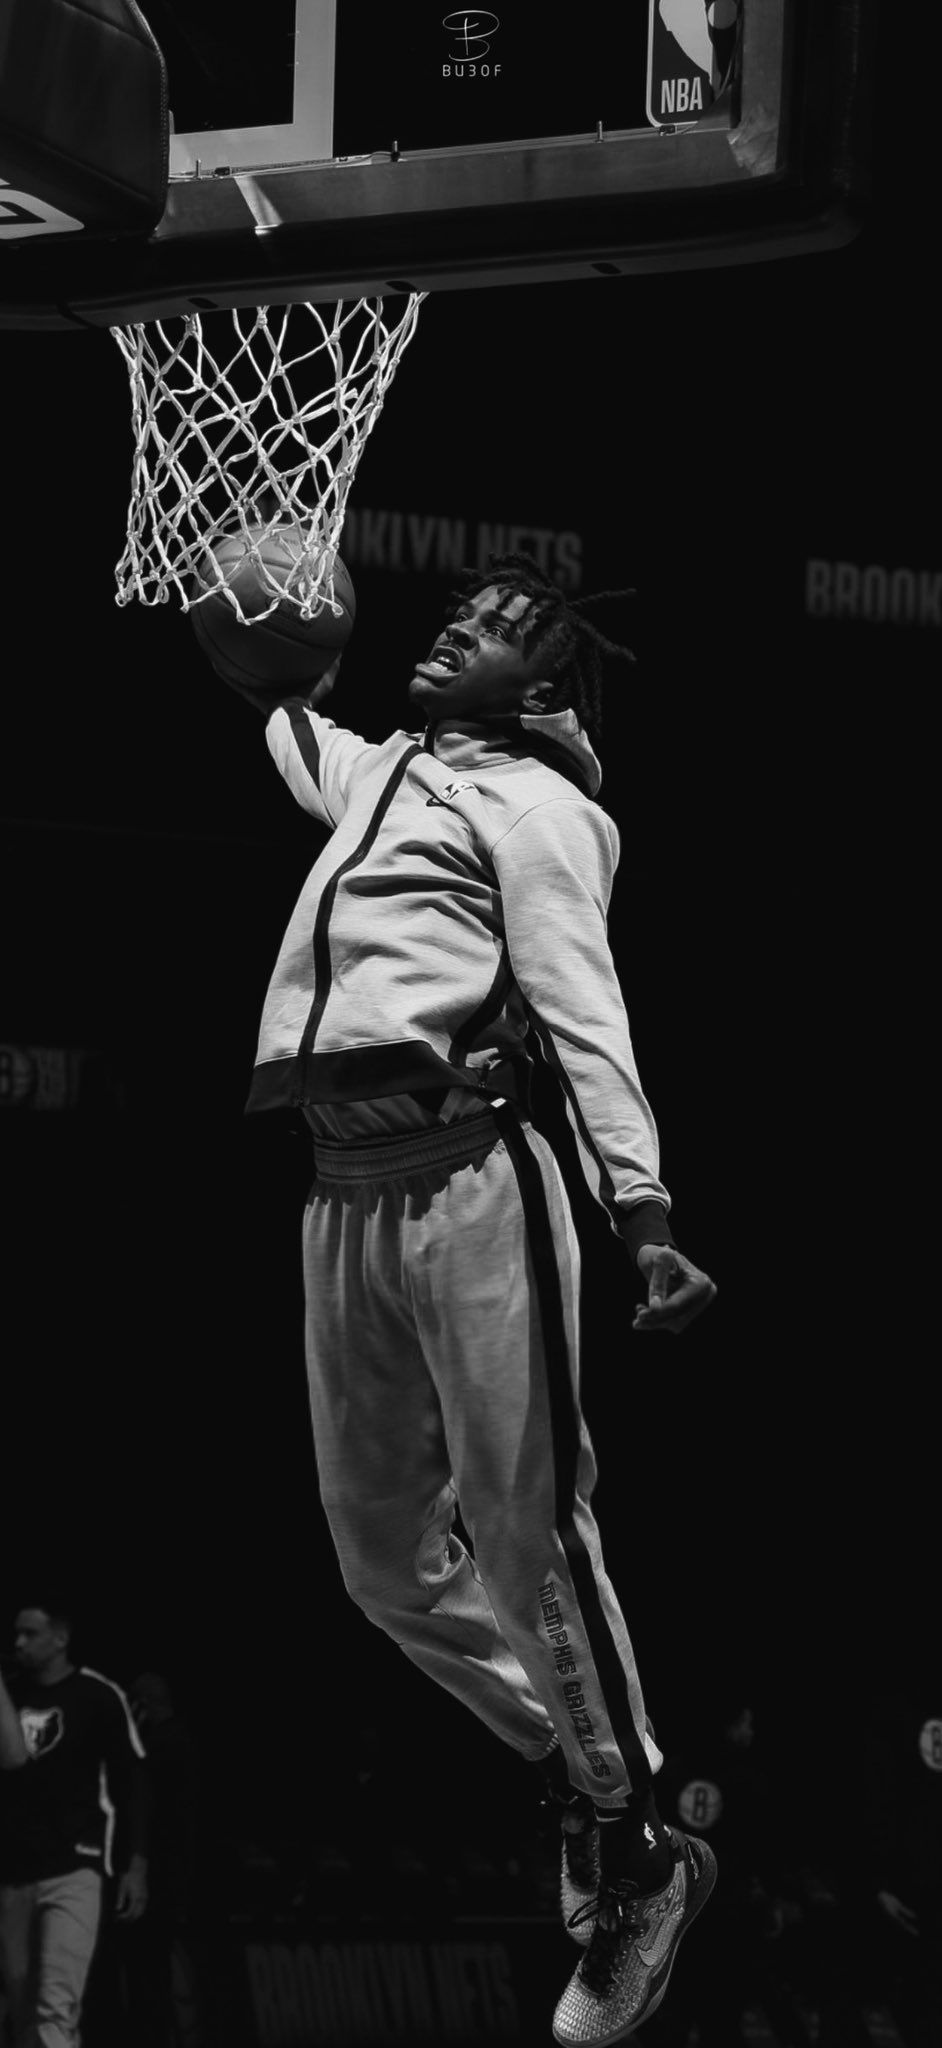 Grayscale photography of a man jumping while hitting the hoop - Ja Morant